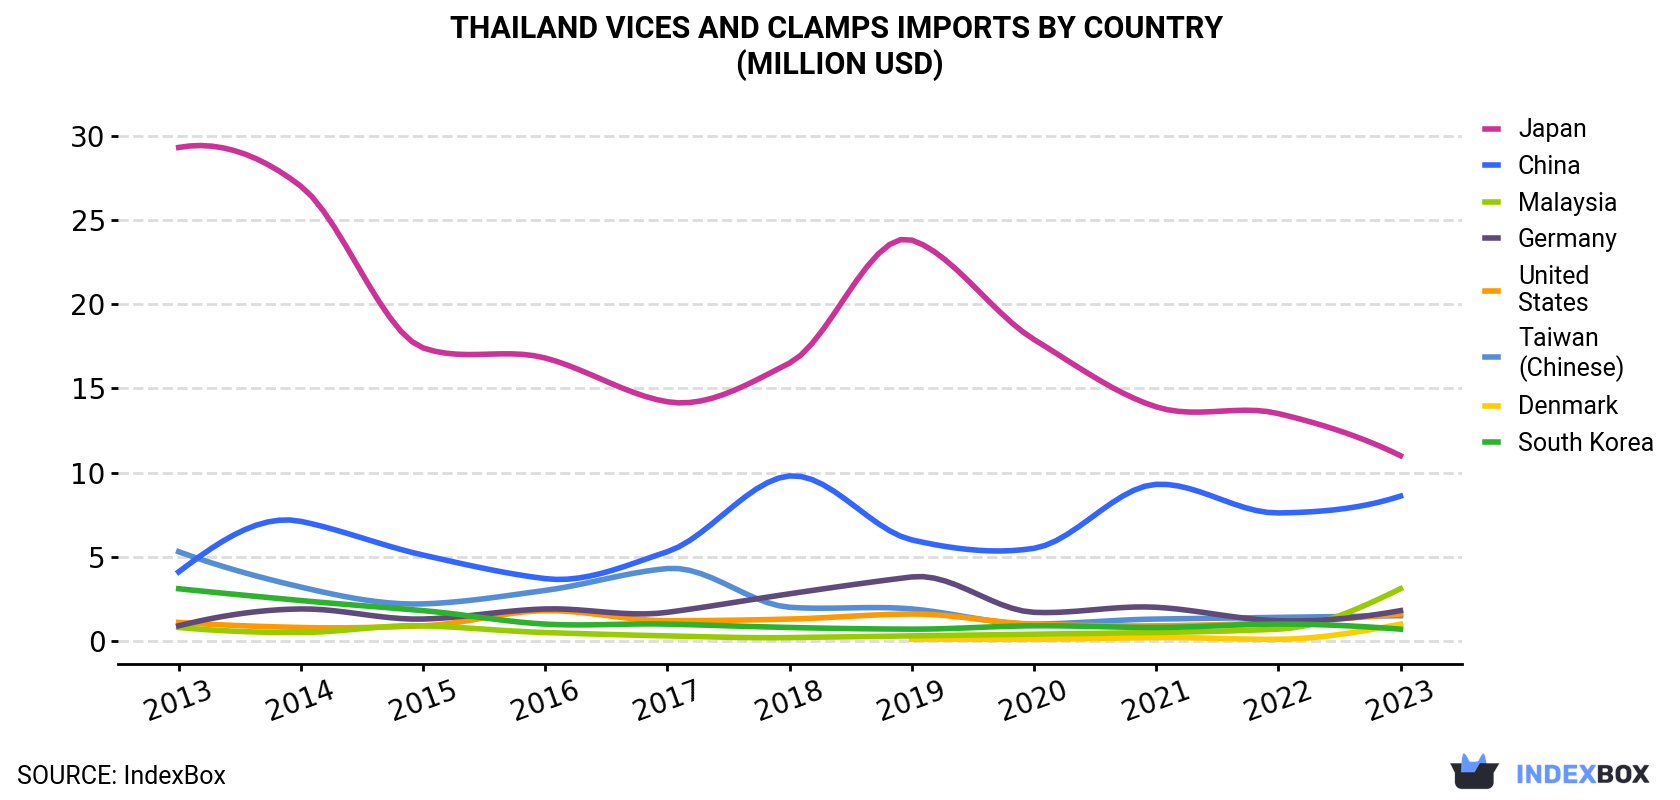 Thailand Vices And Clamps Imports By Country (Million USD)